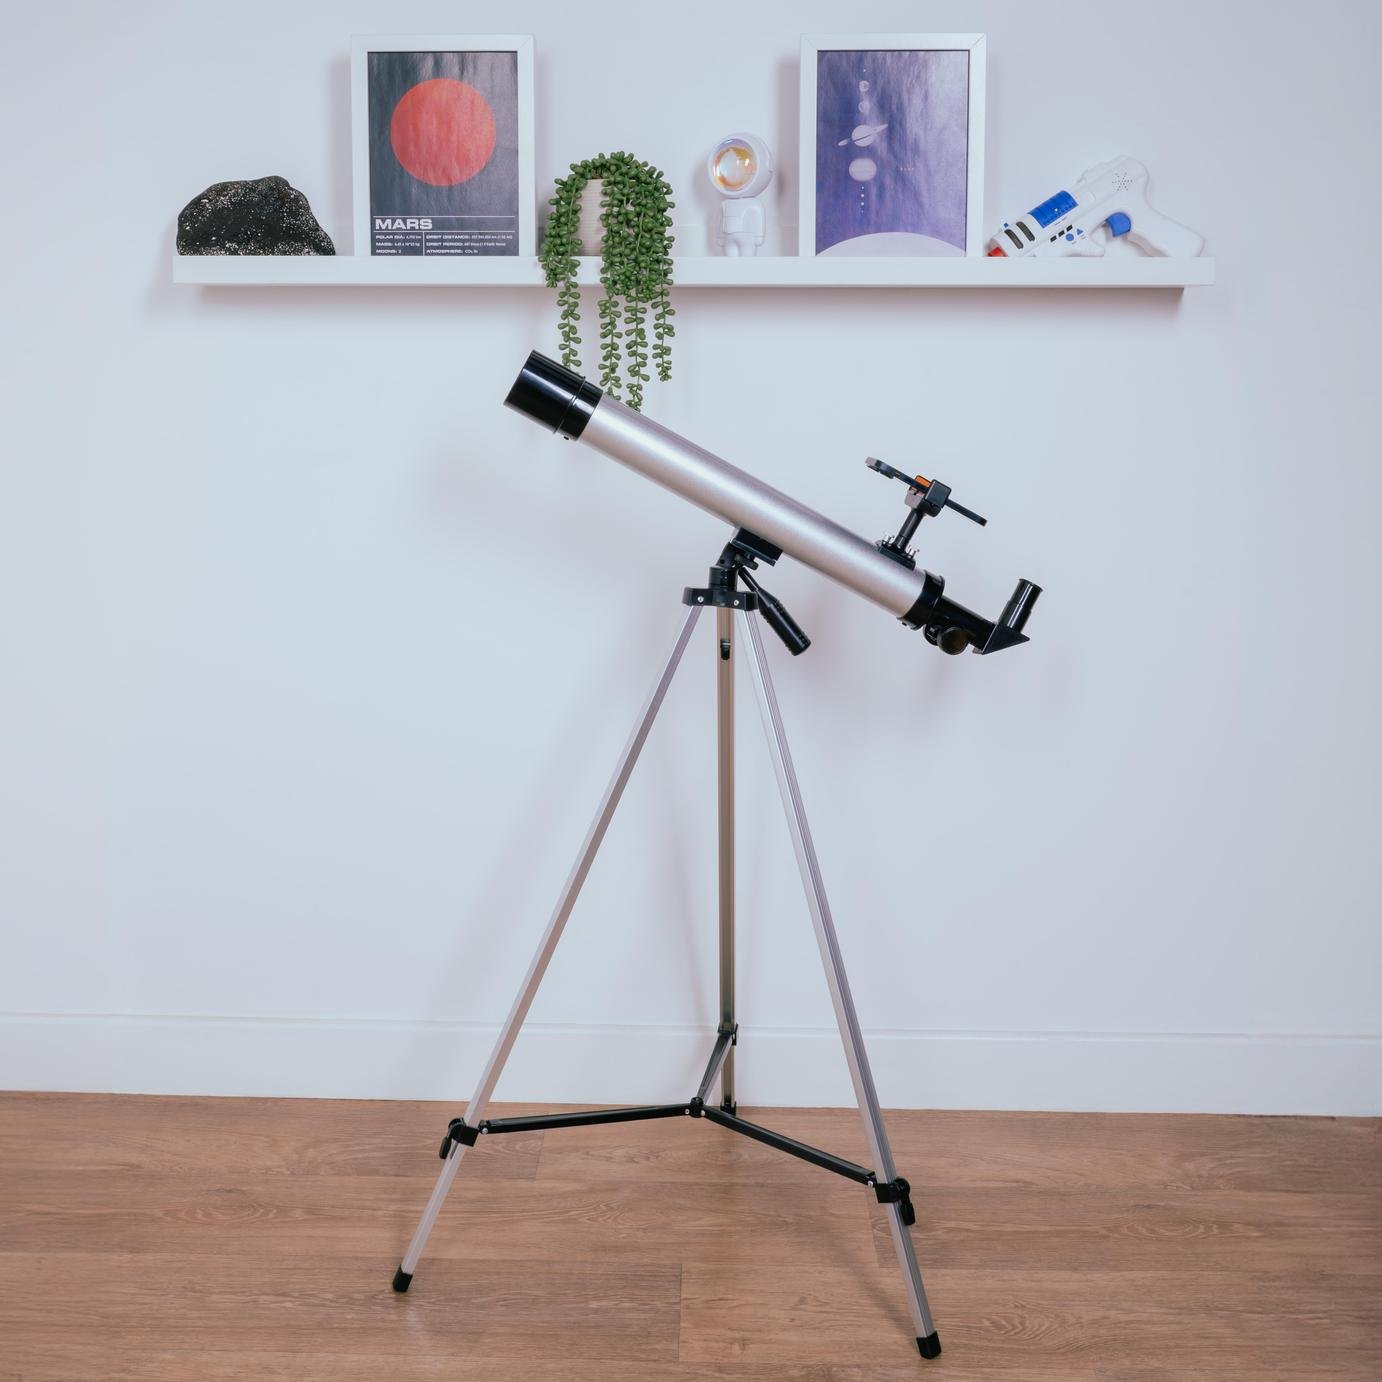 Star Finding Telescope Review